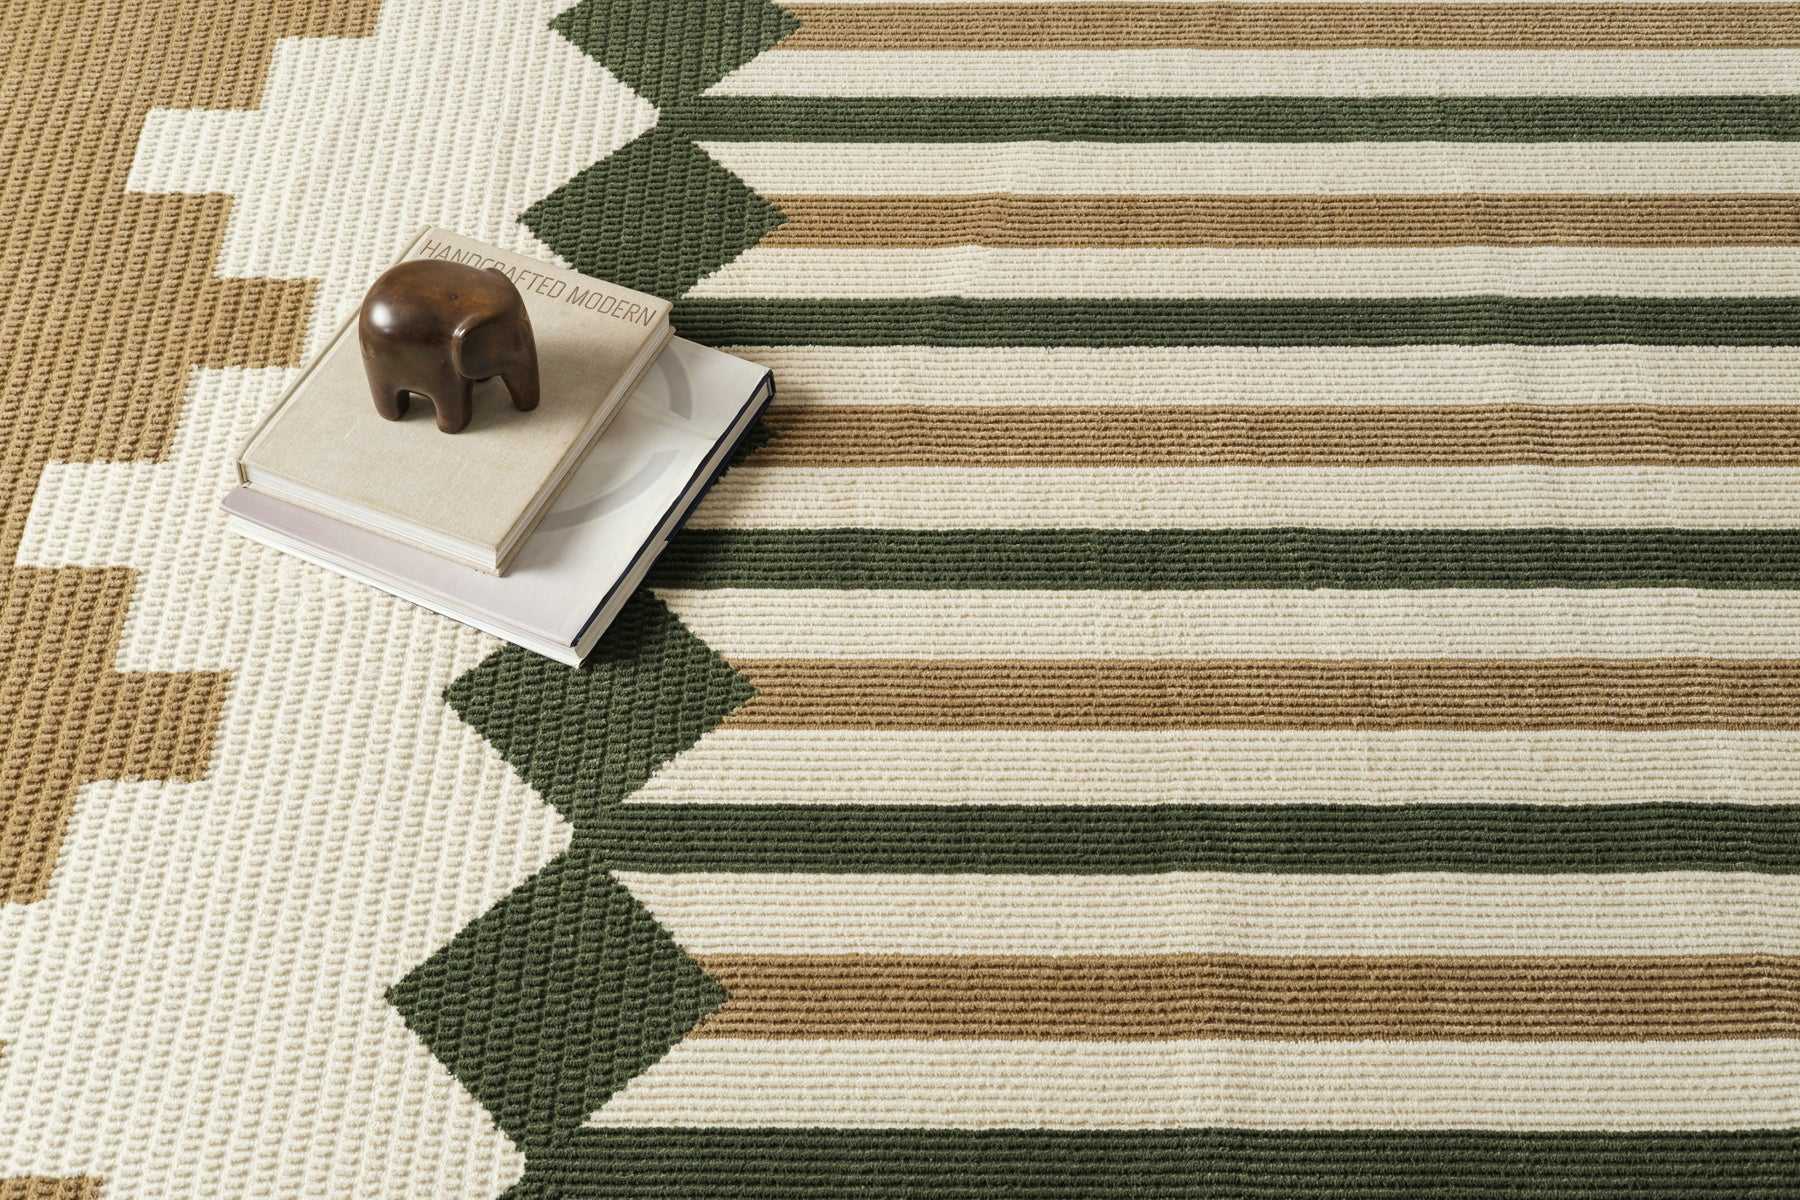 13 Best Places to Buy Cheap, Stylish Area Rugs Online in 2024, Decor  Trends & Design News